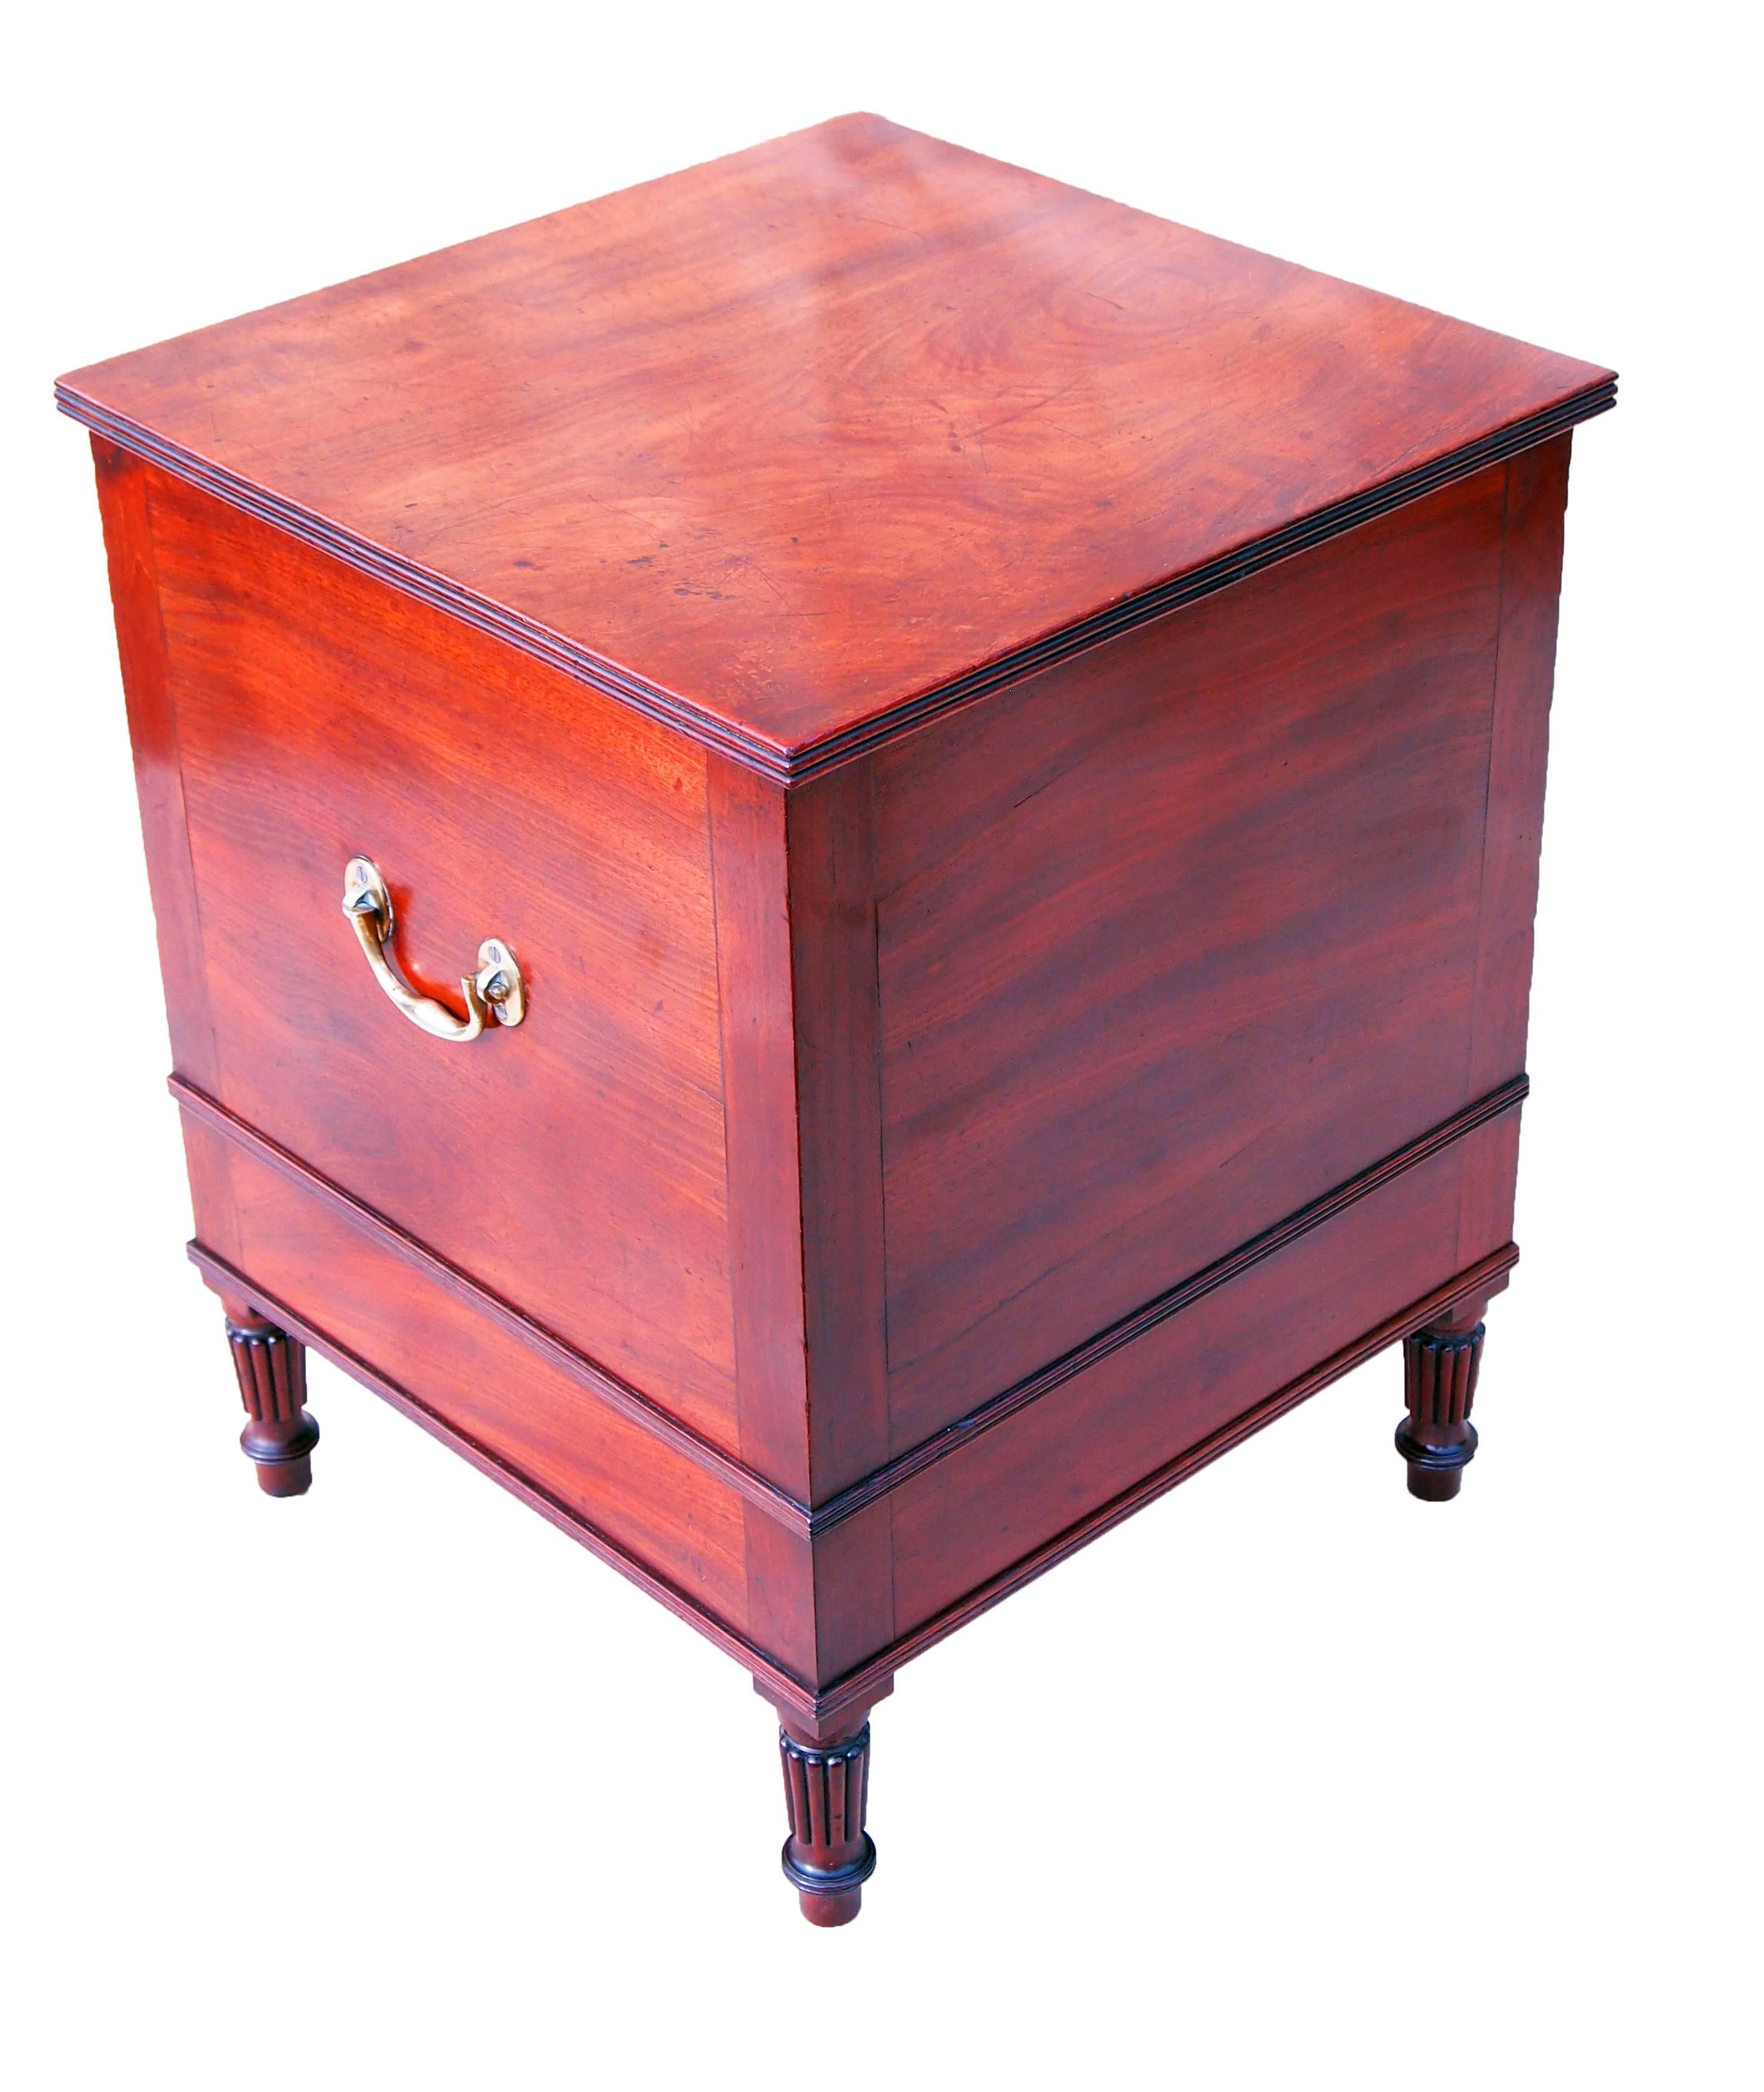 A superb quality regency period mahogany box Cellarette having well figured
lift up top concealing interior fitted with bottle divisions above one frieze
drawer and original brass handles raised on elegant turned and reeded legs.